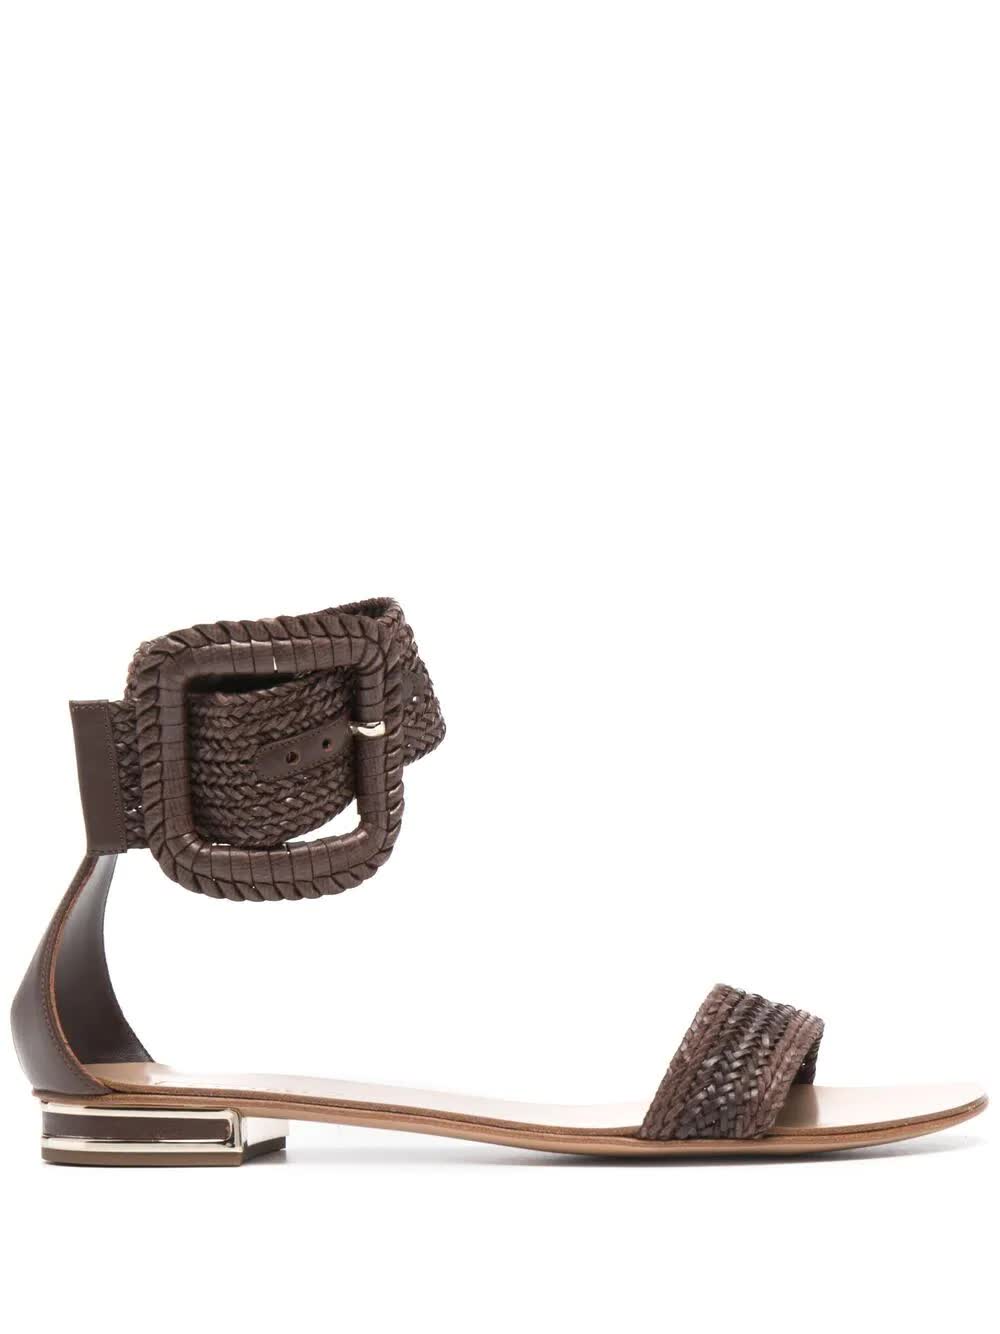 Casadei Low Sandal In Brown Hanoi With Maxi Buckle